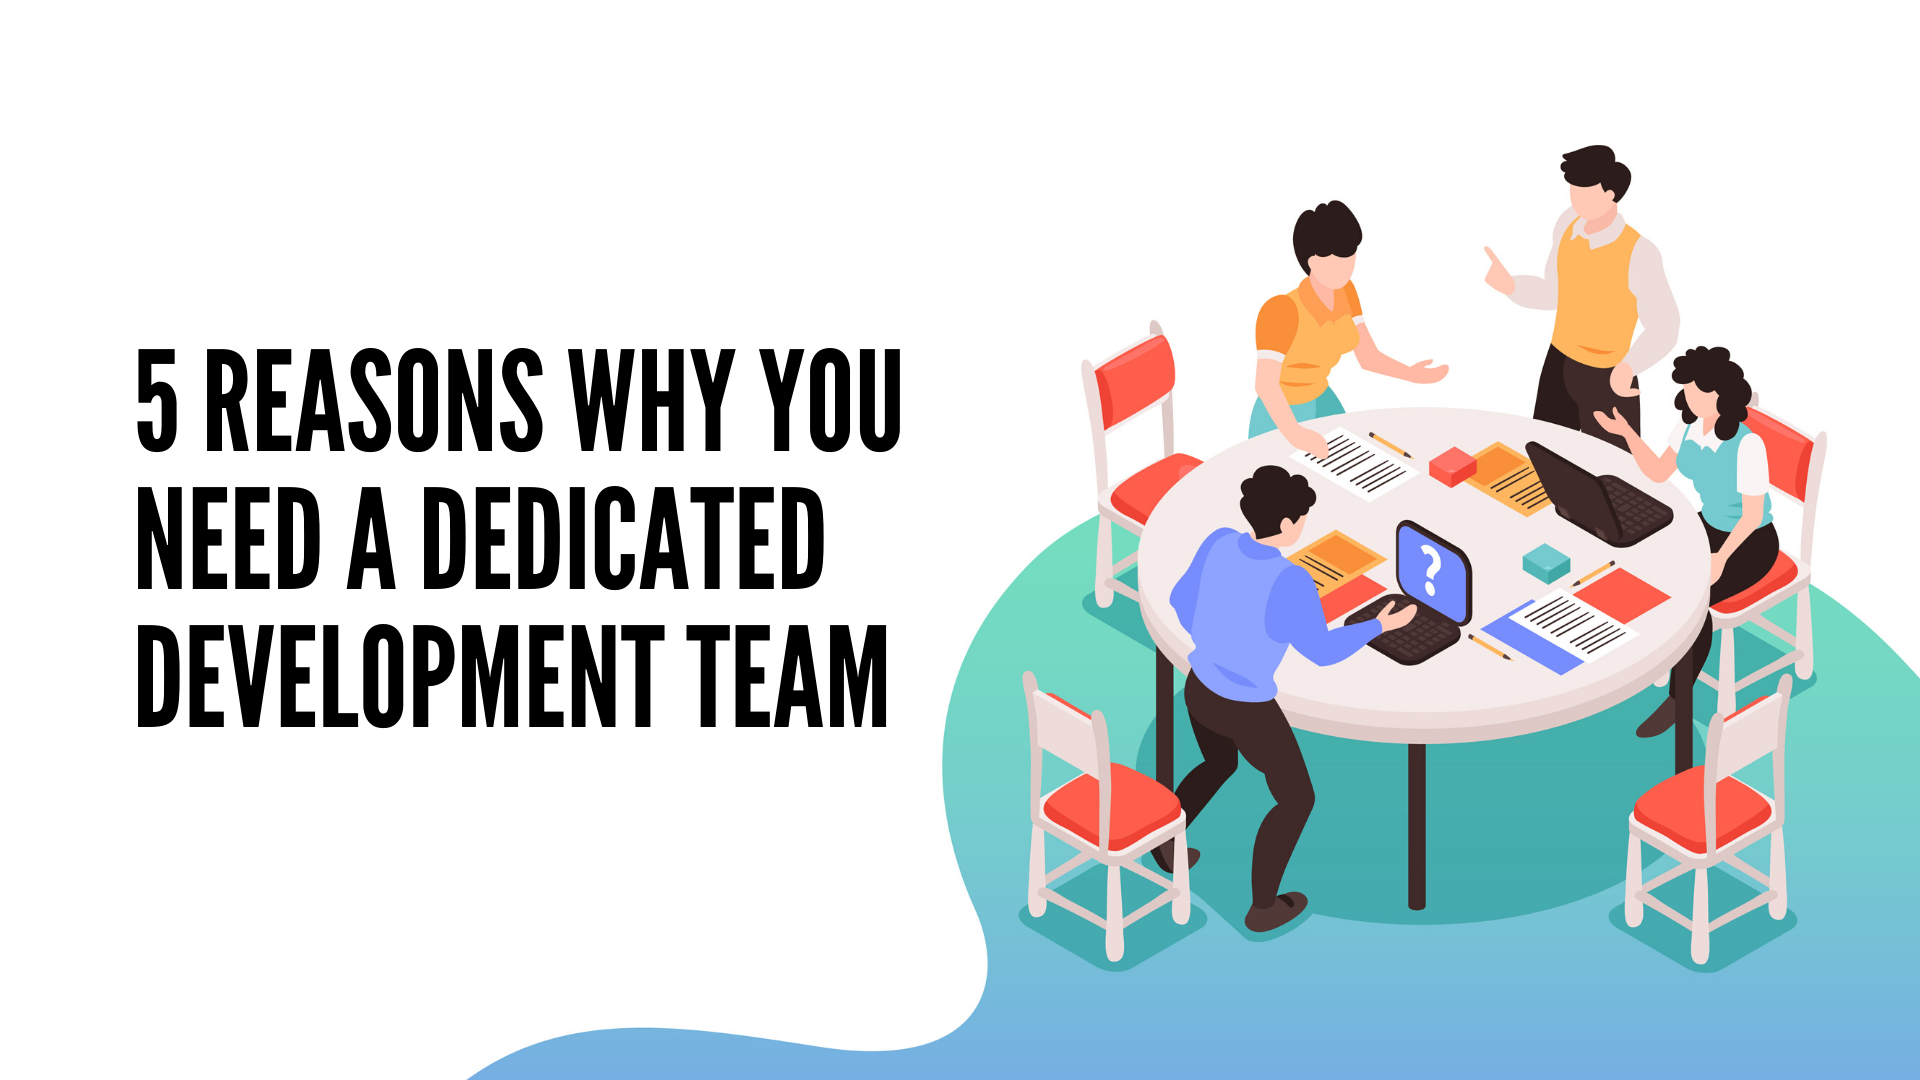 5 Reasons Why You Need A Dedicated Development Team